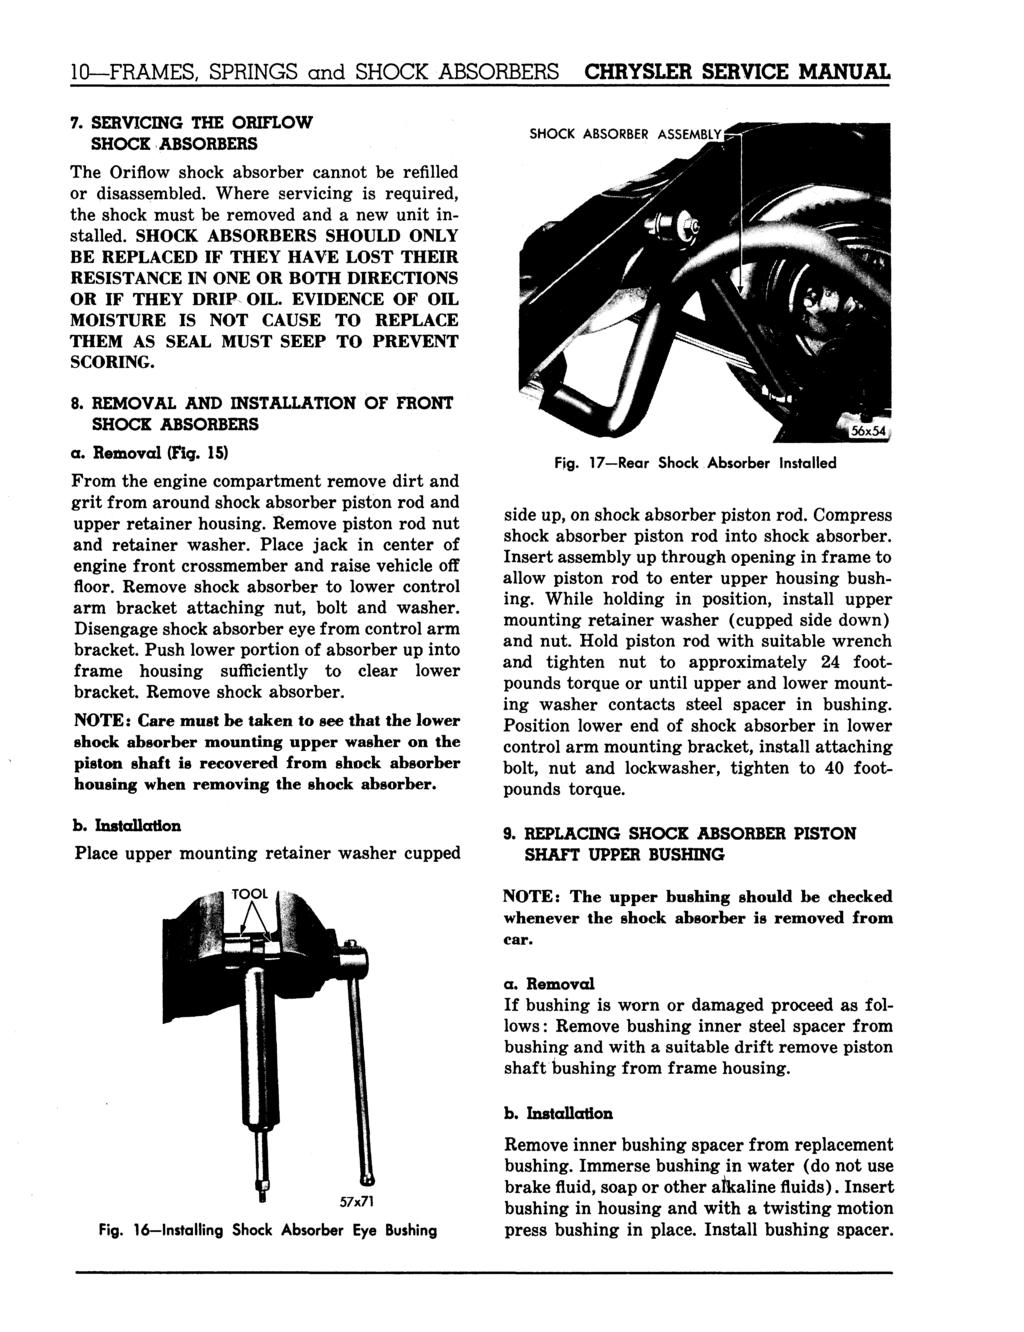 10 FRAMES, SPRINGS and SHOCK ABSORBERS CHRYSLER SERVICE MANUAL 7. SERVICING THE ORIFLOW SHOCK ABSORBERS The Oriflow shock absorber cannot be refilled or disassembled.